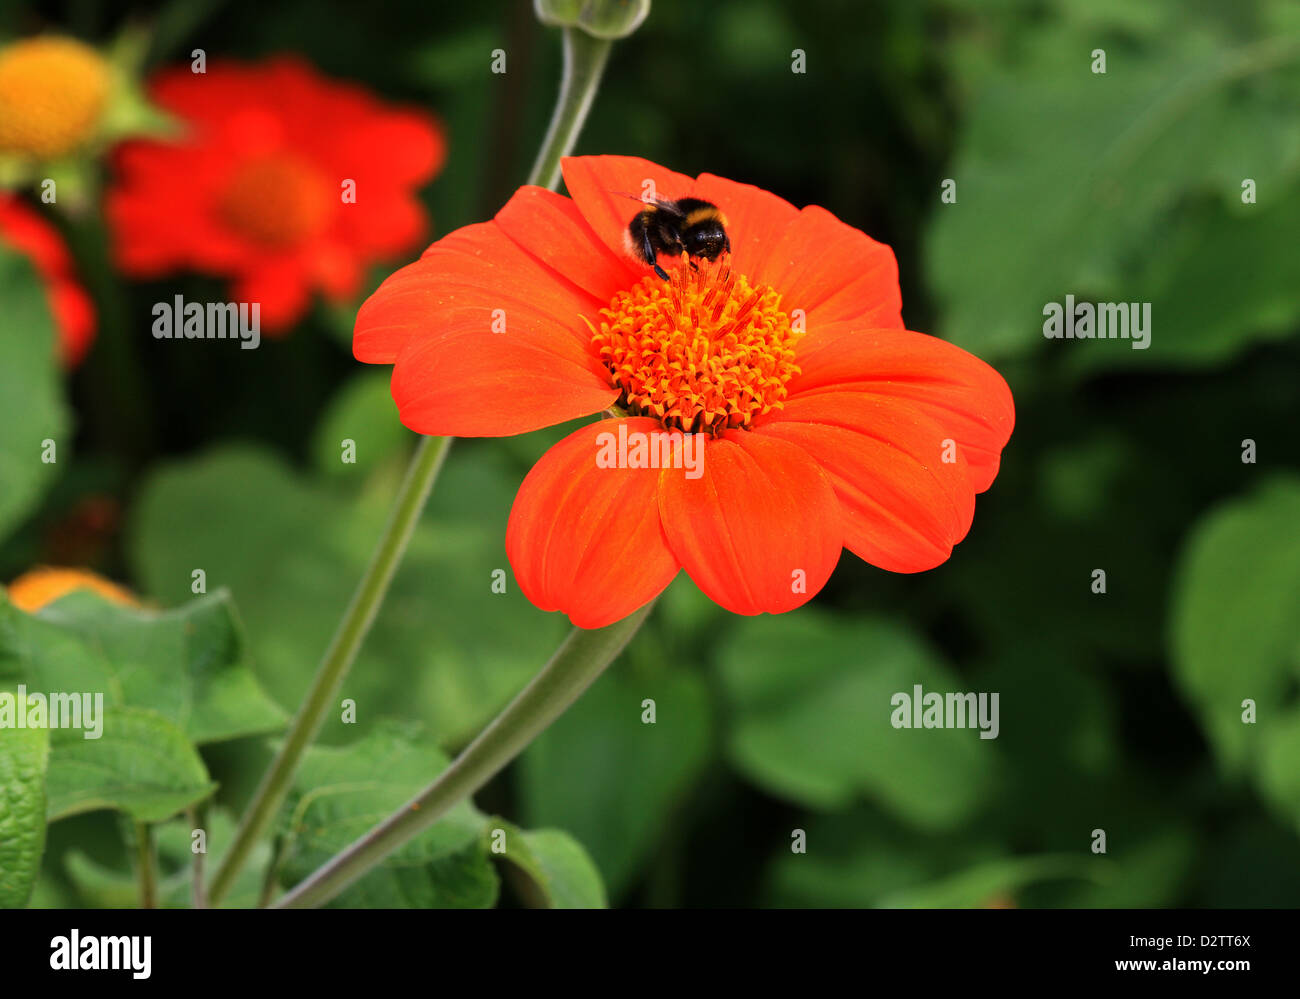 Mexican Sunflower, Clavel De Muerto, Mexican-Sunflower, Red-Sunflower, Tithonia rotundifolia, Asteraceae. Mexico. Stock Photo